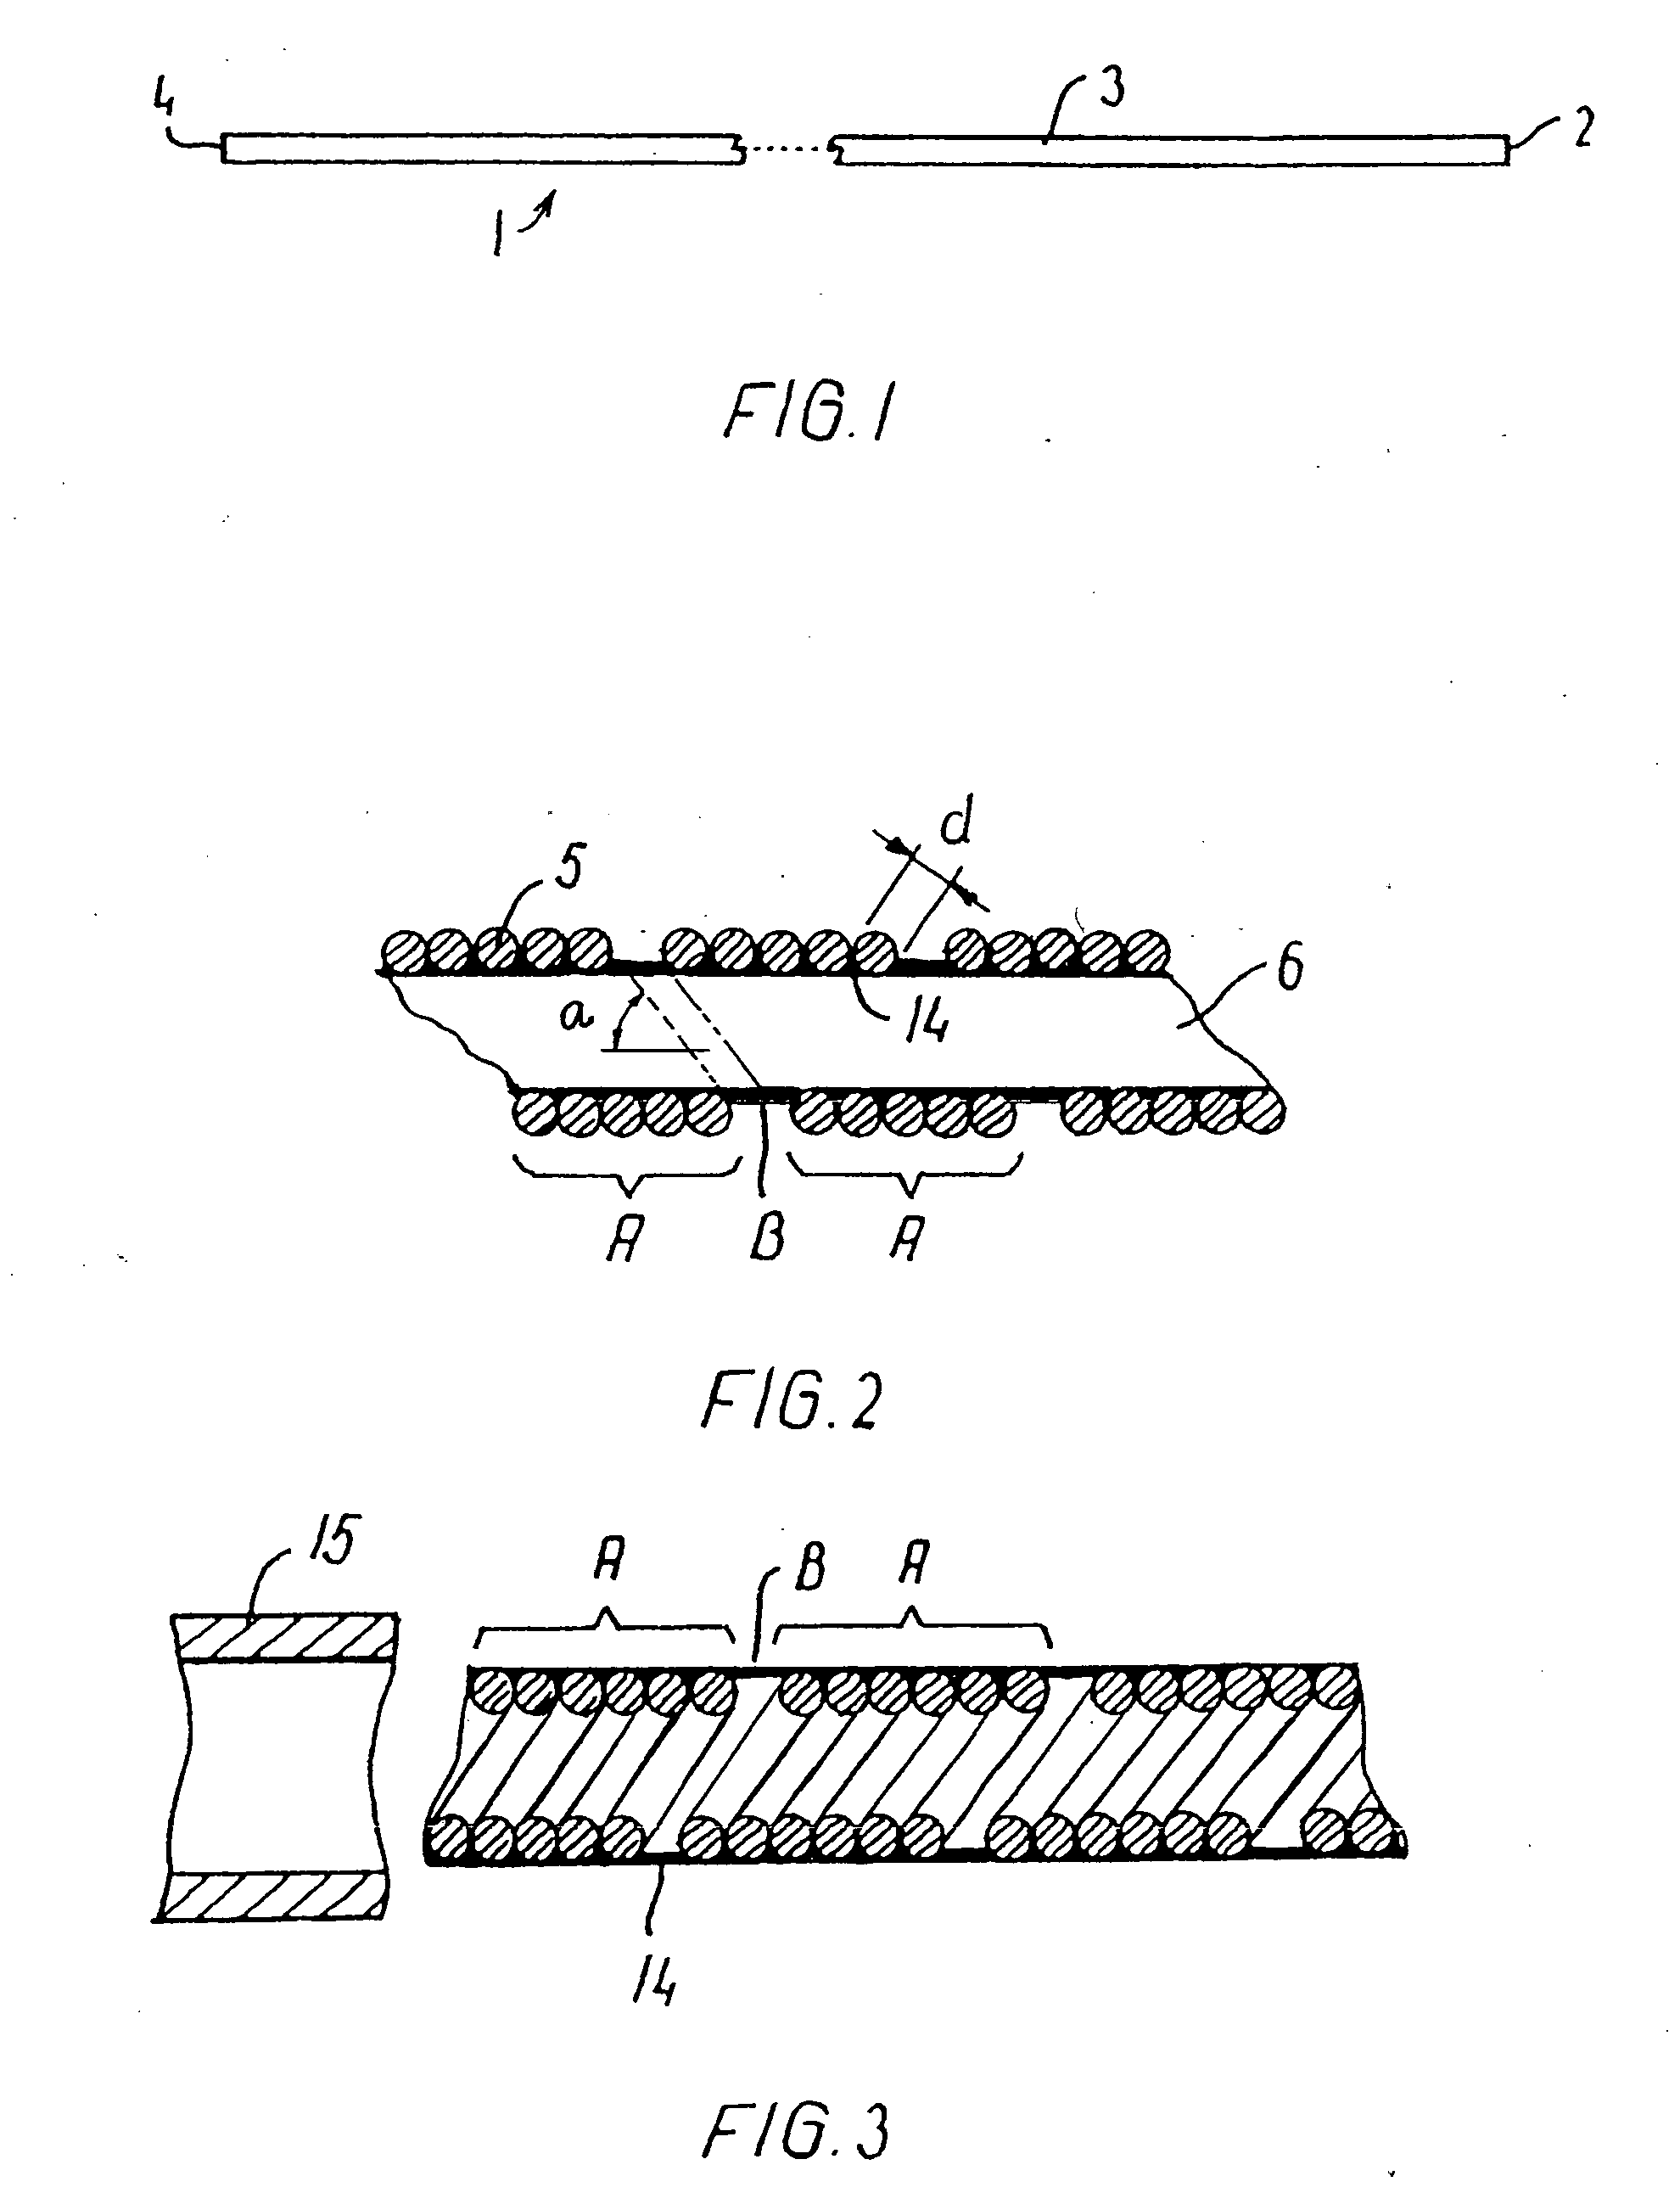 Endovascular medical device with plurality of wires